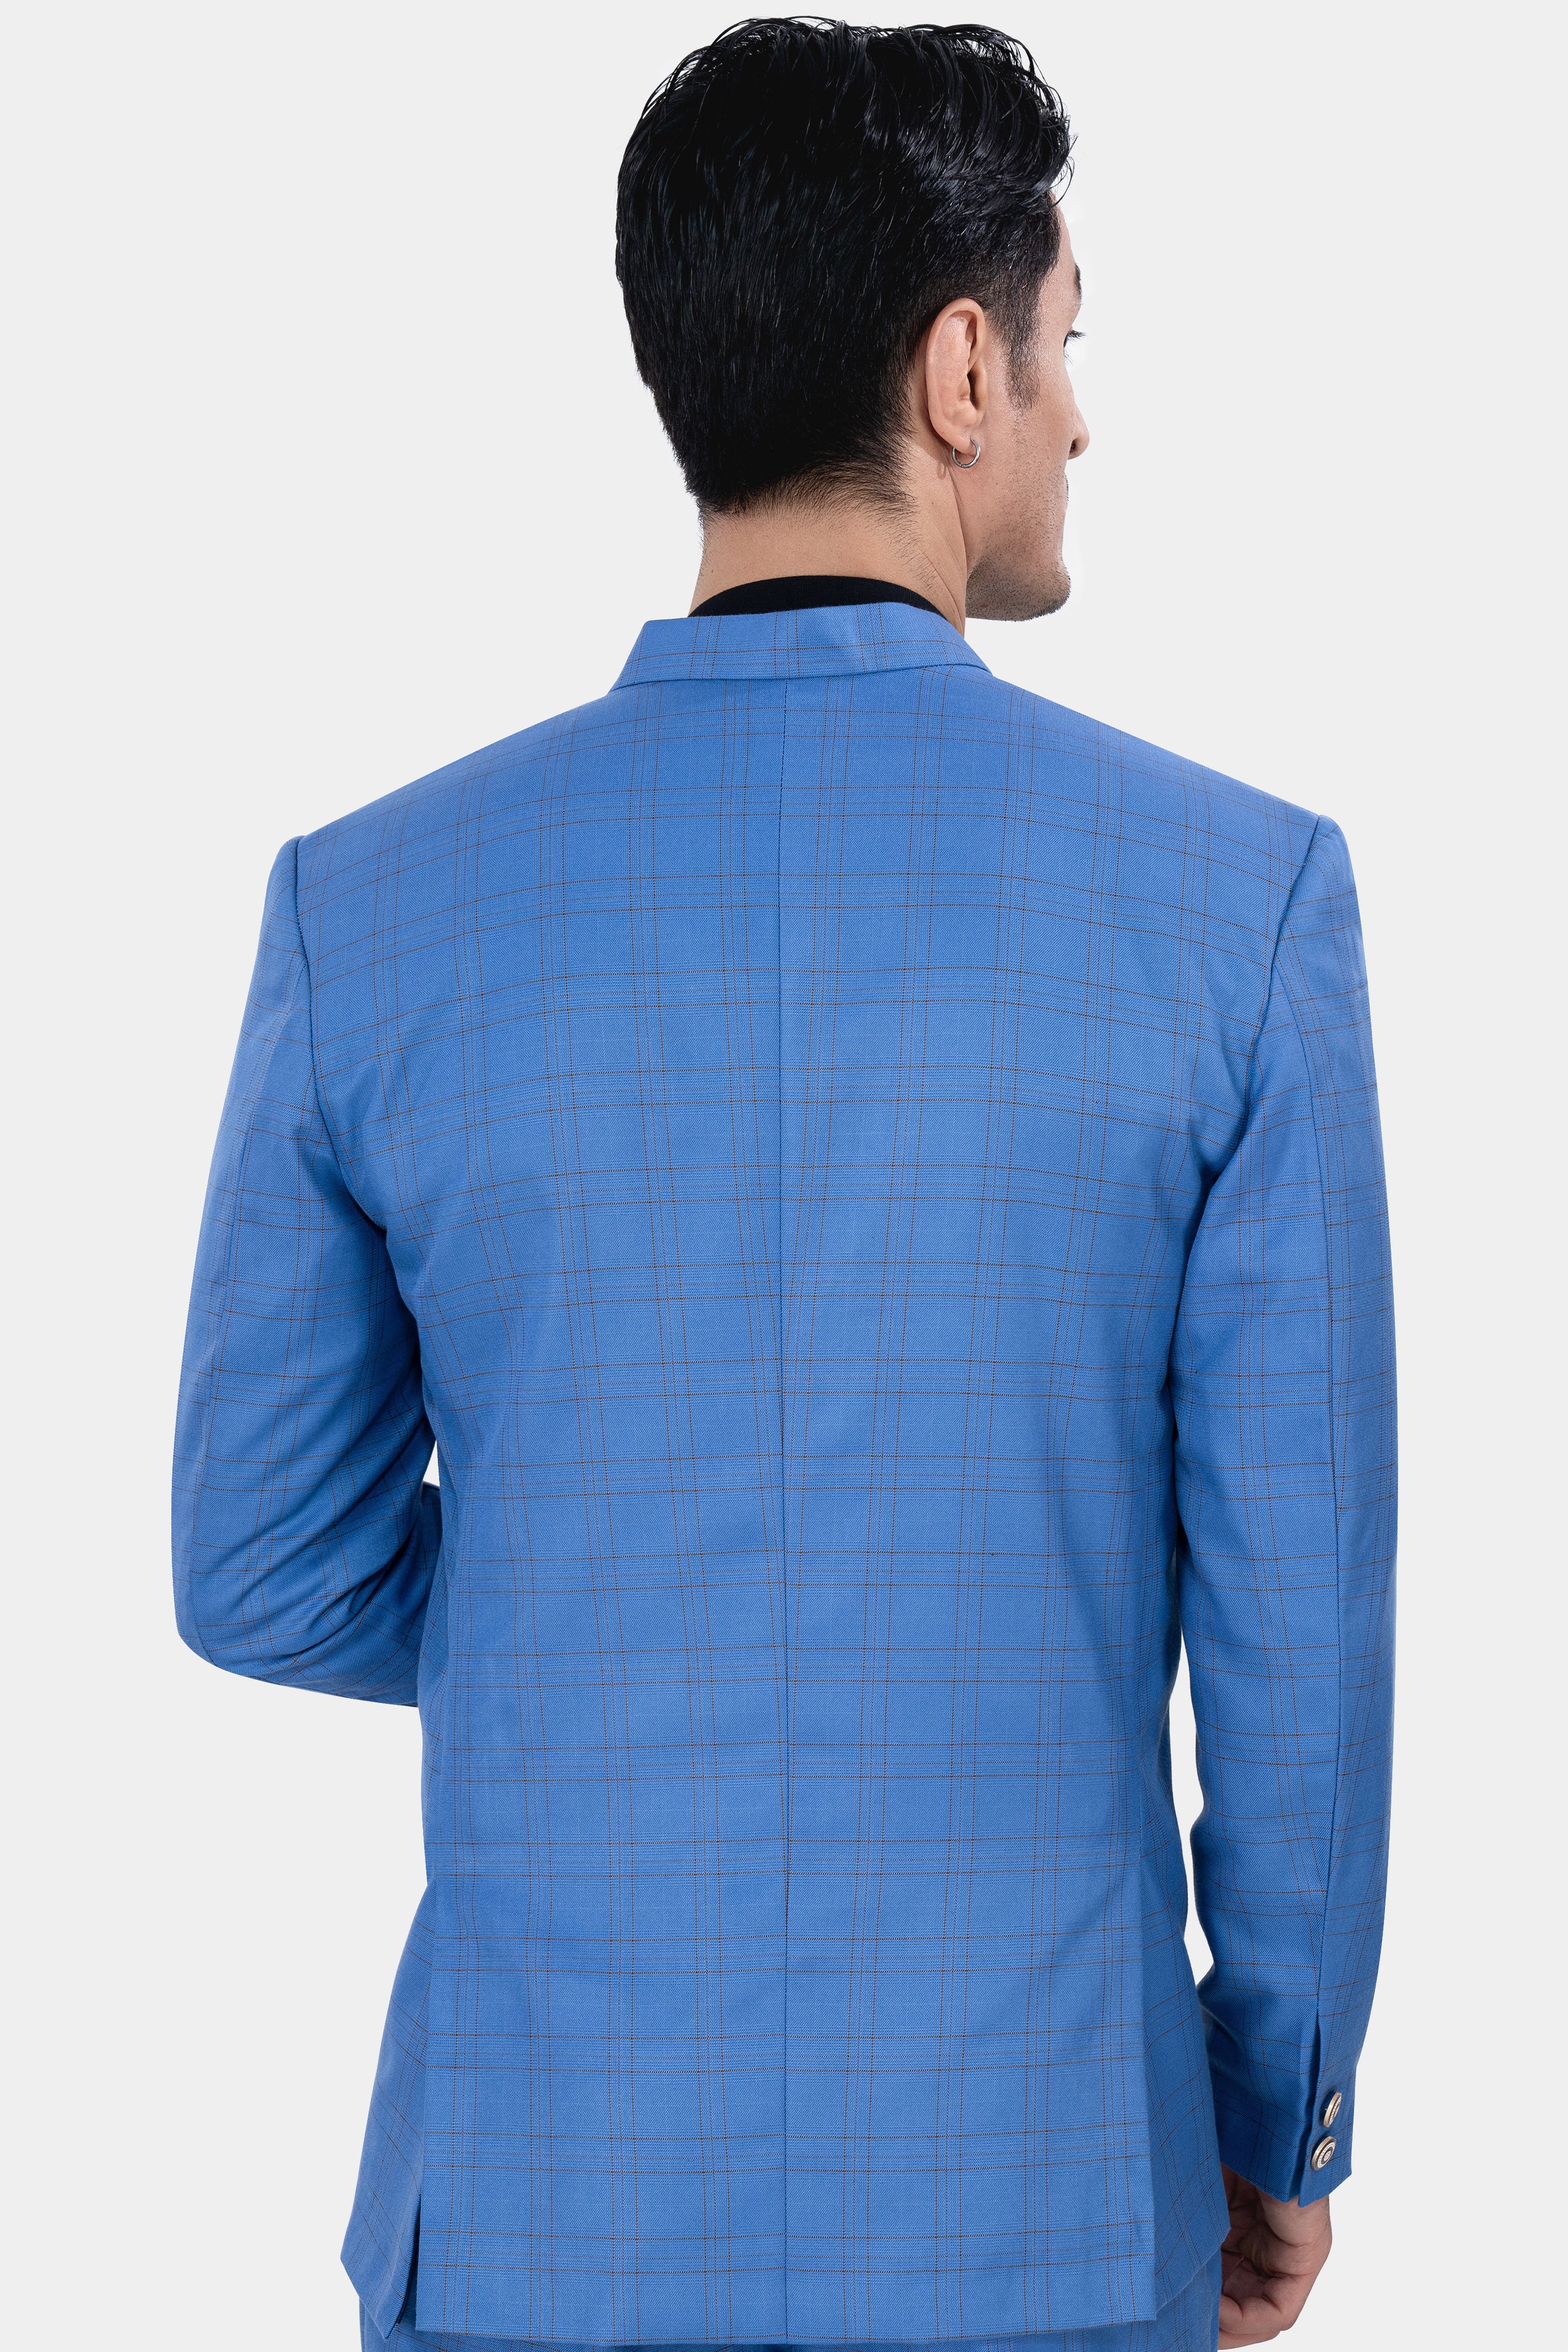 Tufts Blue and Taupe Brown Plaid Wool Rich Bandhgala Designer Blazer BL2876-D434-36, BL2876-D434-38, BL2876-D434-40, BL2876-D434-42, BL2876-D434-44, BL2876-D434-46, BL2876-D434-48, BL2876-D434-50, BL2876-D434-76, BL2876-D434-54, BL2876-D434-56, BL2876-D434-58, BL2876-D434-60